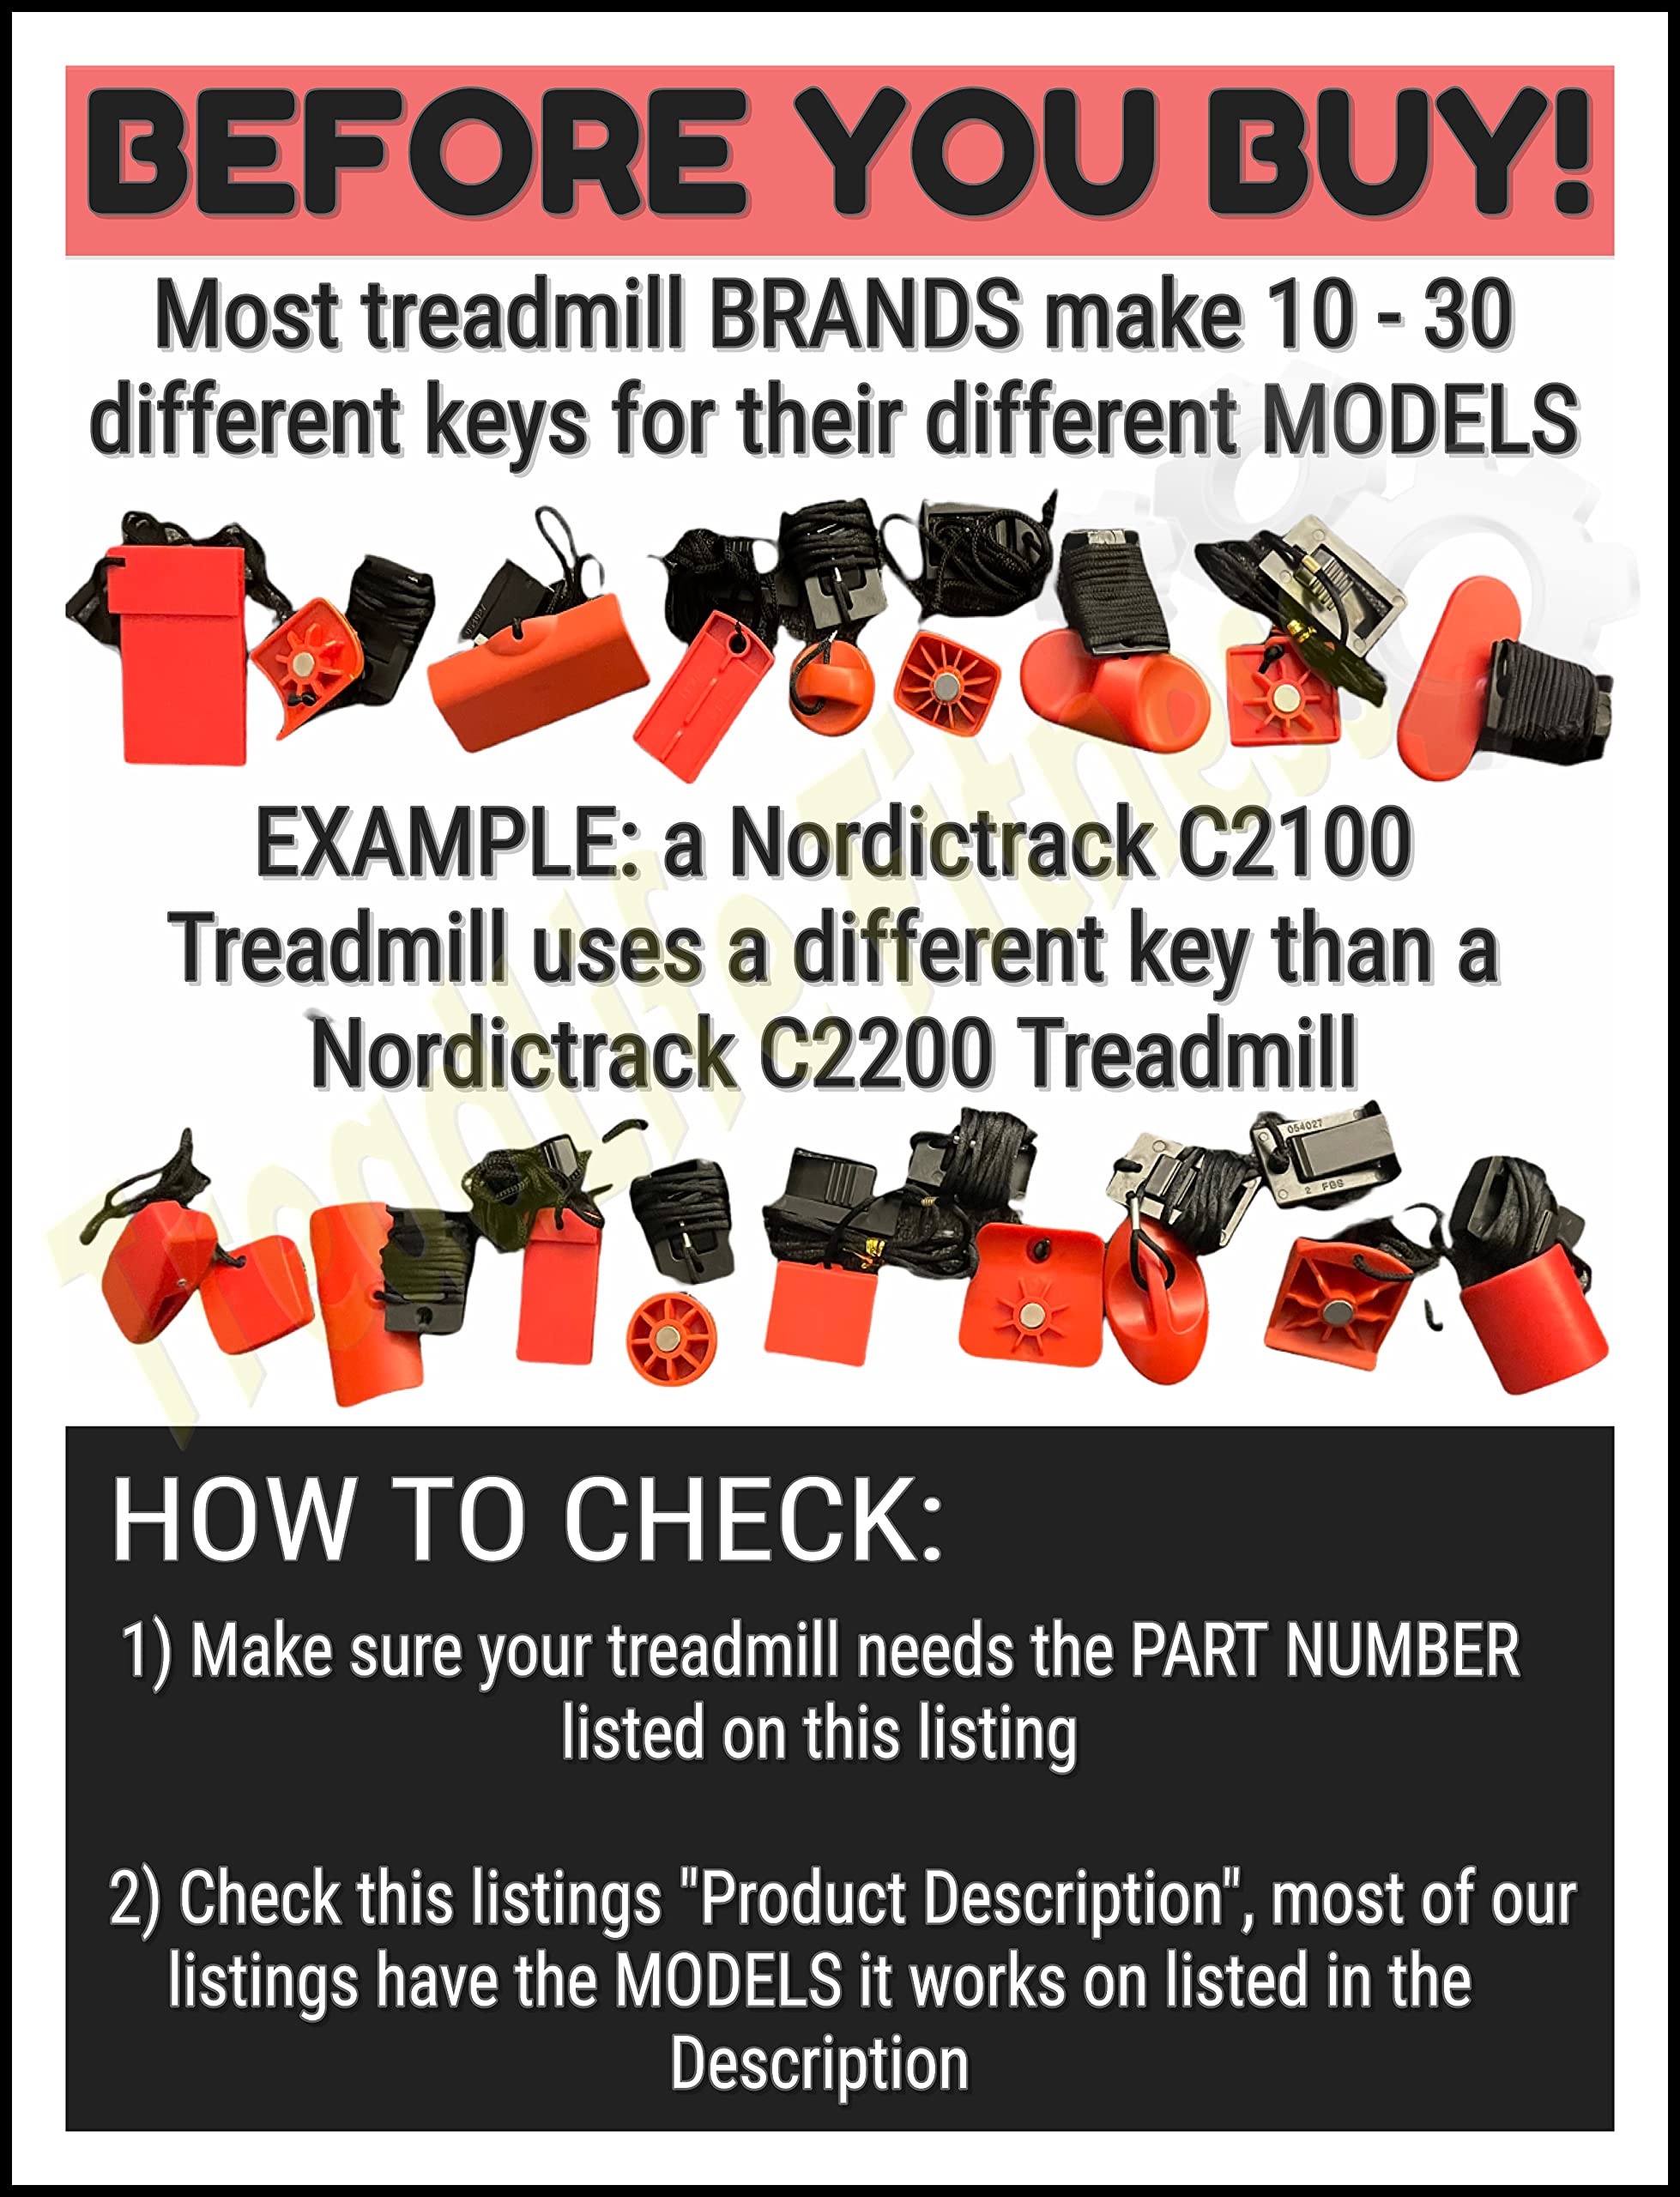 TreadLife Fitness Treadmill Key - compatible with Various NordicTrack Models Part Number: 245920 - comes with Free Treadmill lub